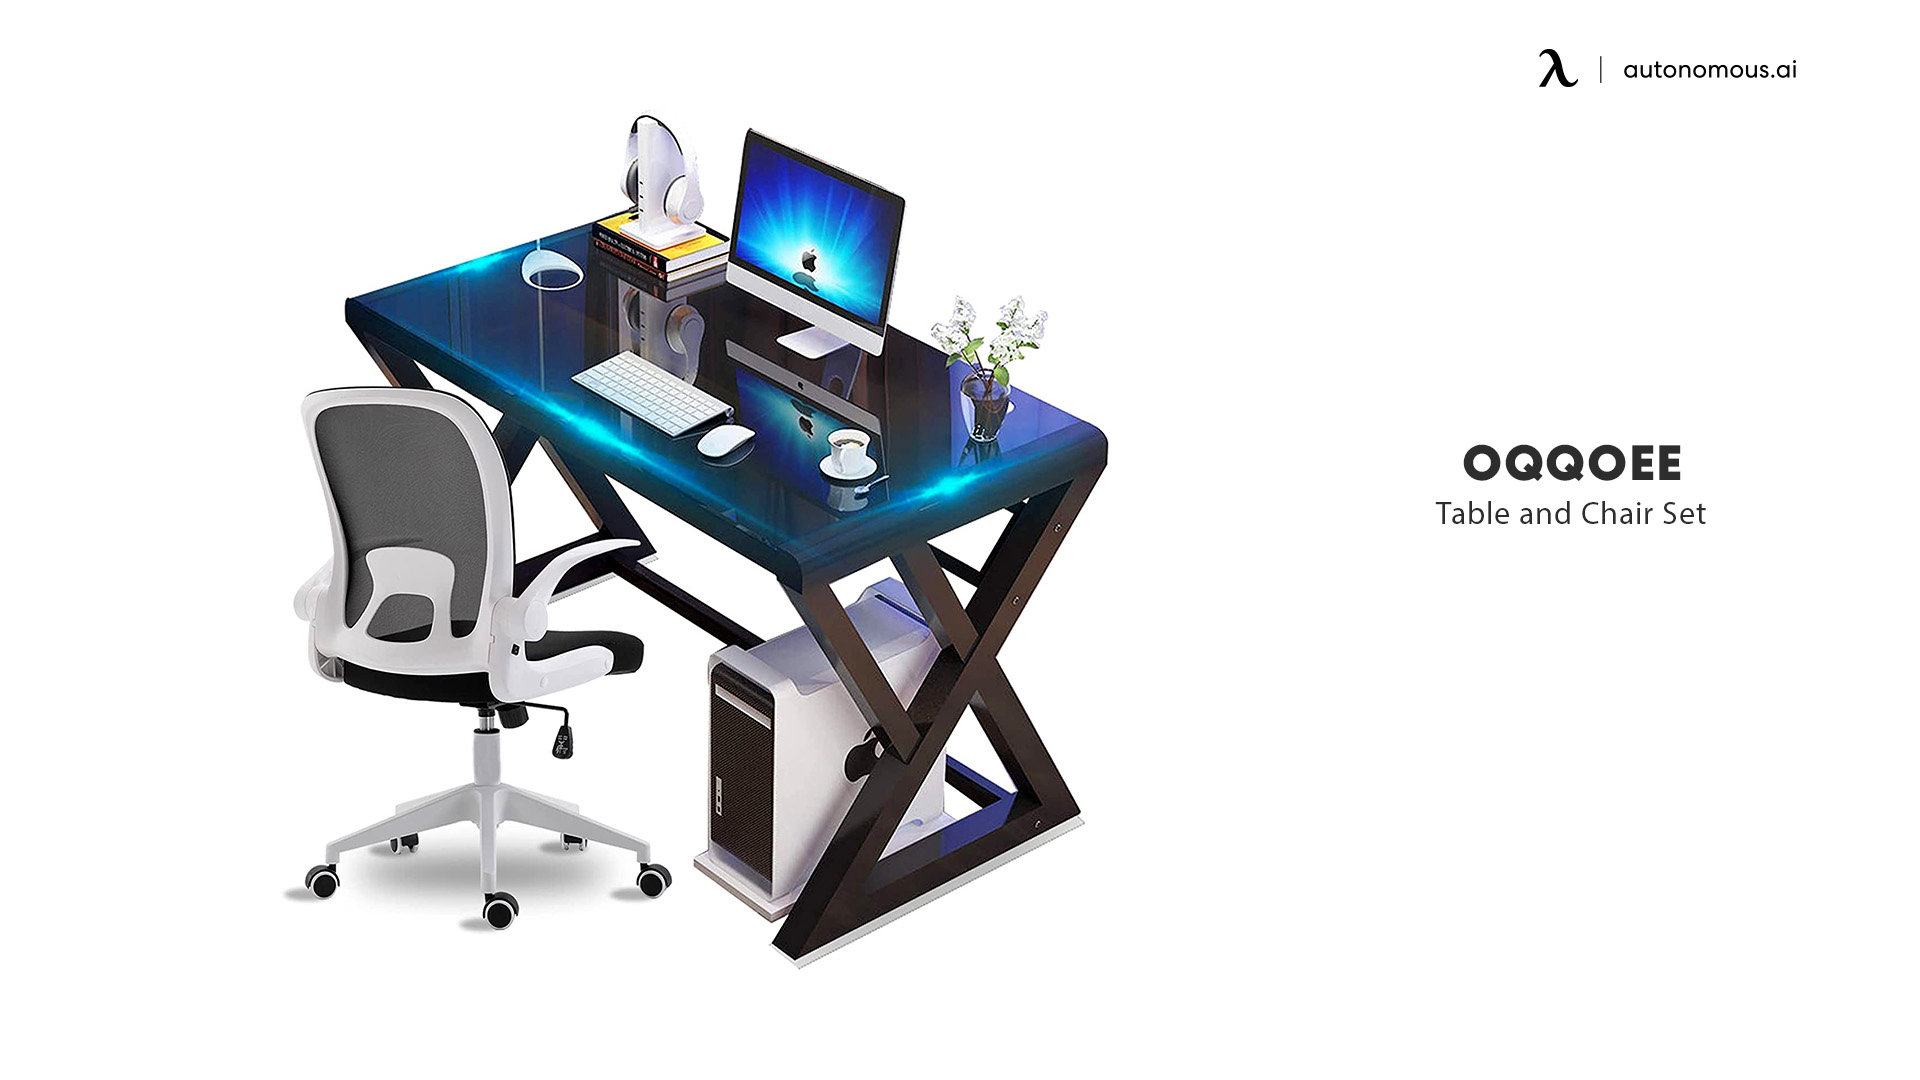 OQQOEE computer desk and chair